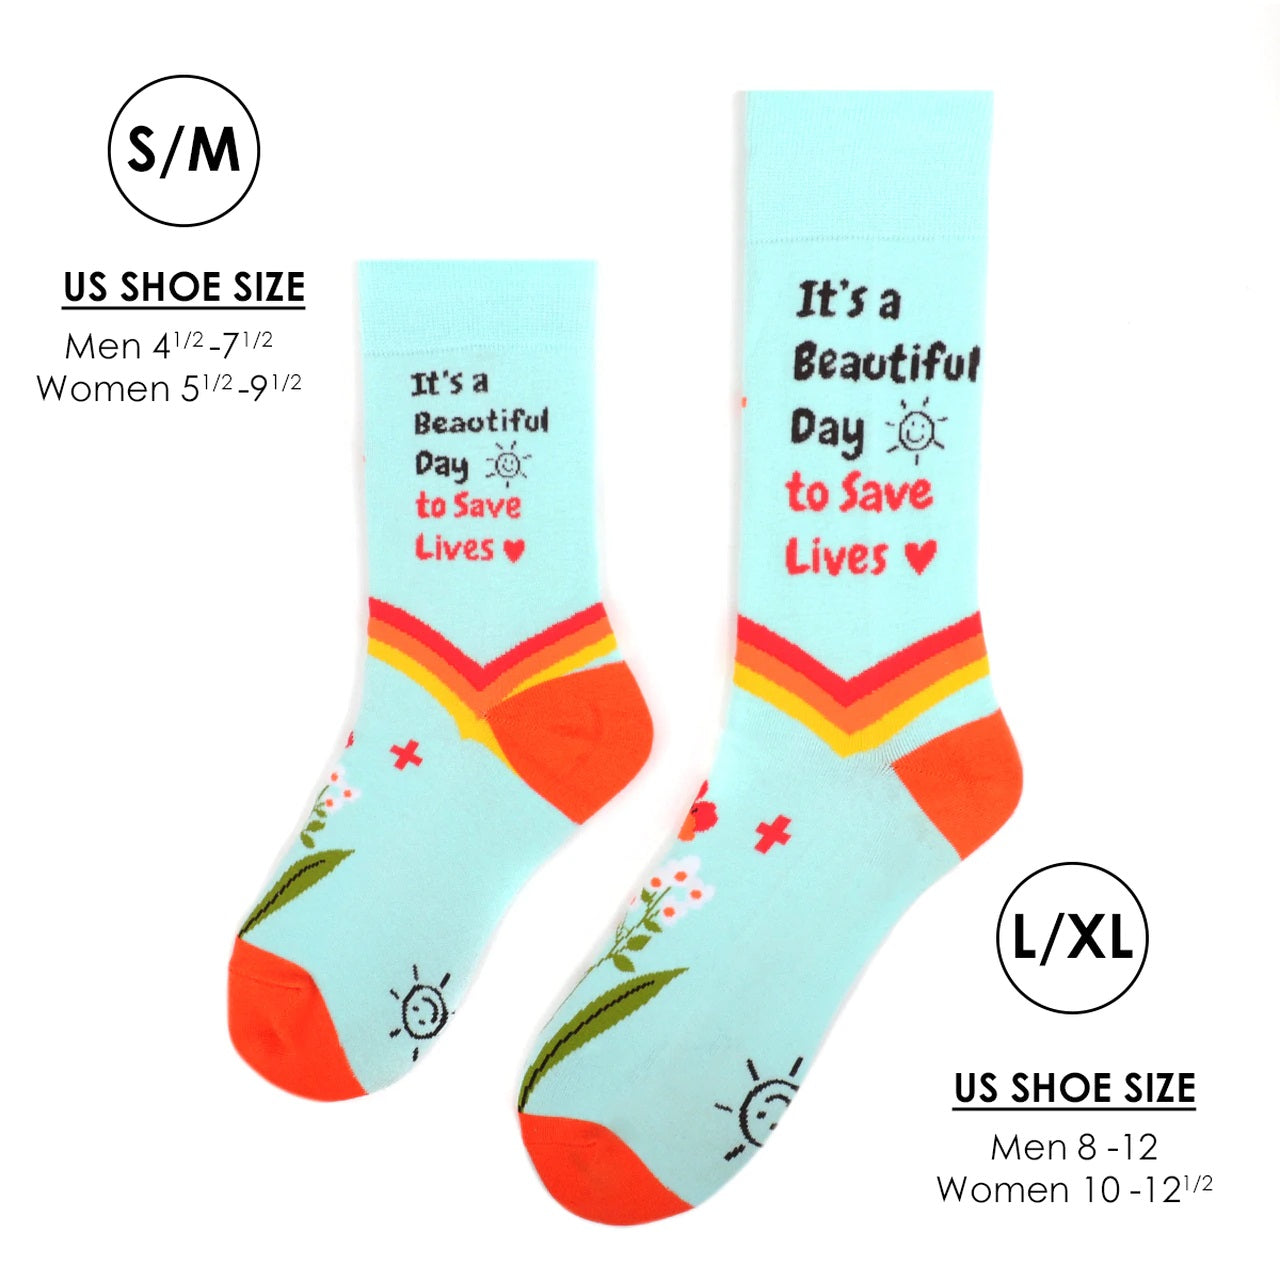 MashasCorner.com   Health Care Heroes -Save Lives- Ultra Premium Socks  Material: 68% cotton, 29% polyester, 3% spandex Sizes: available in S/M and L/XL S/M: men shoe size: 4.5-7.5, ladies shoe size: 5.5-9.5 L/XL: men shoe size: 8-12, ladies shoe size: 10-10.5 Unisex style